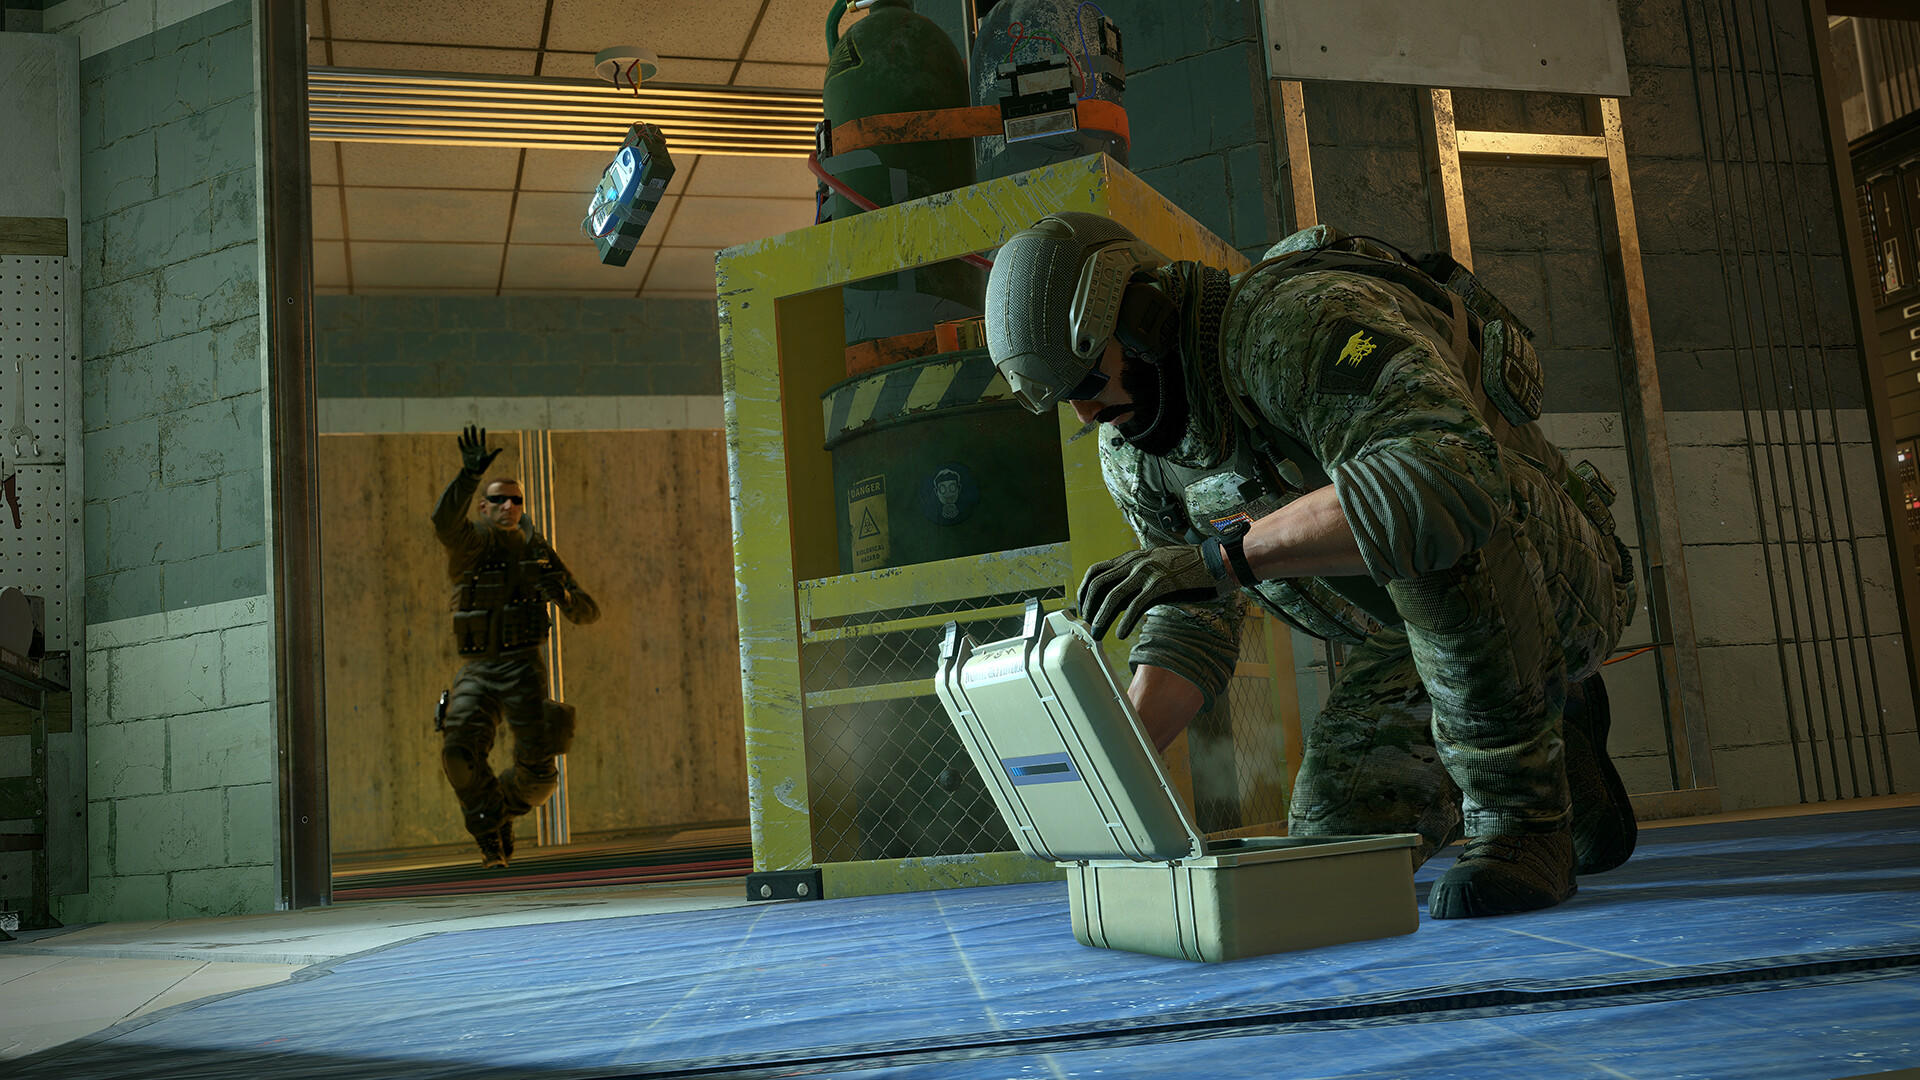 Rainbow Six Siege Mobile: How To Sign Up For The Beta - GameSpot